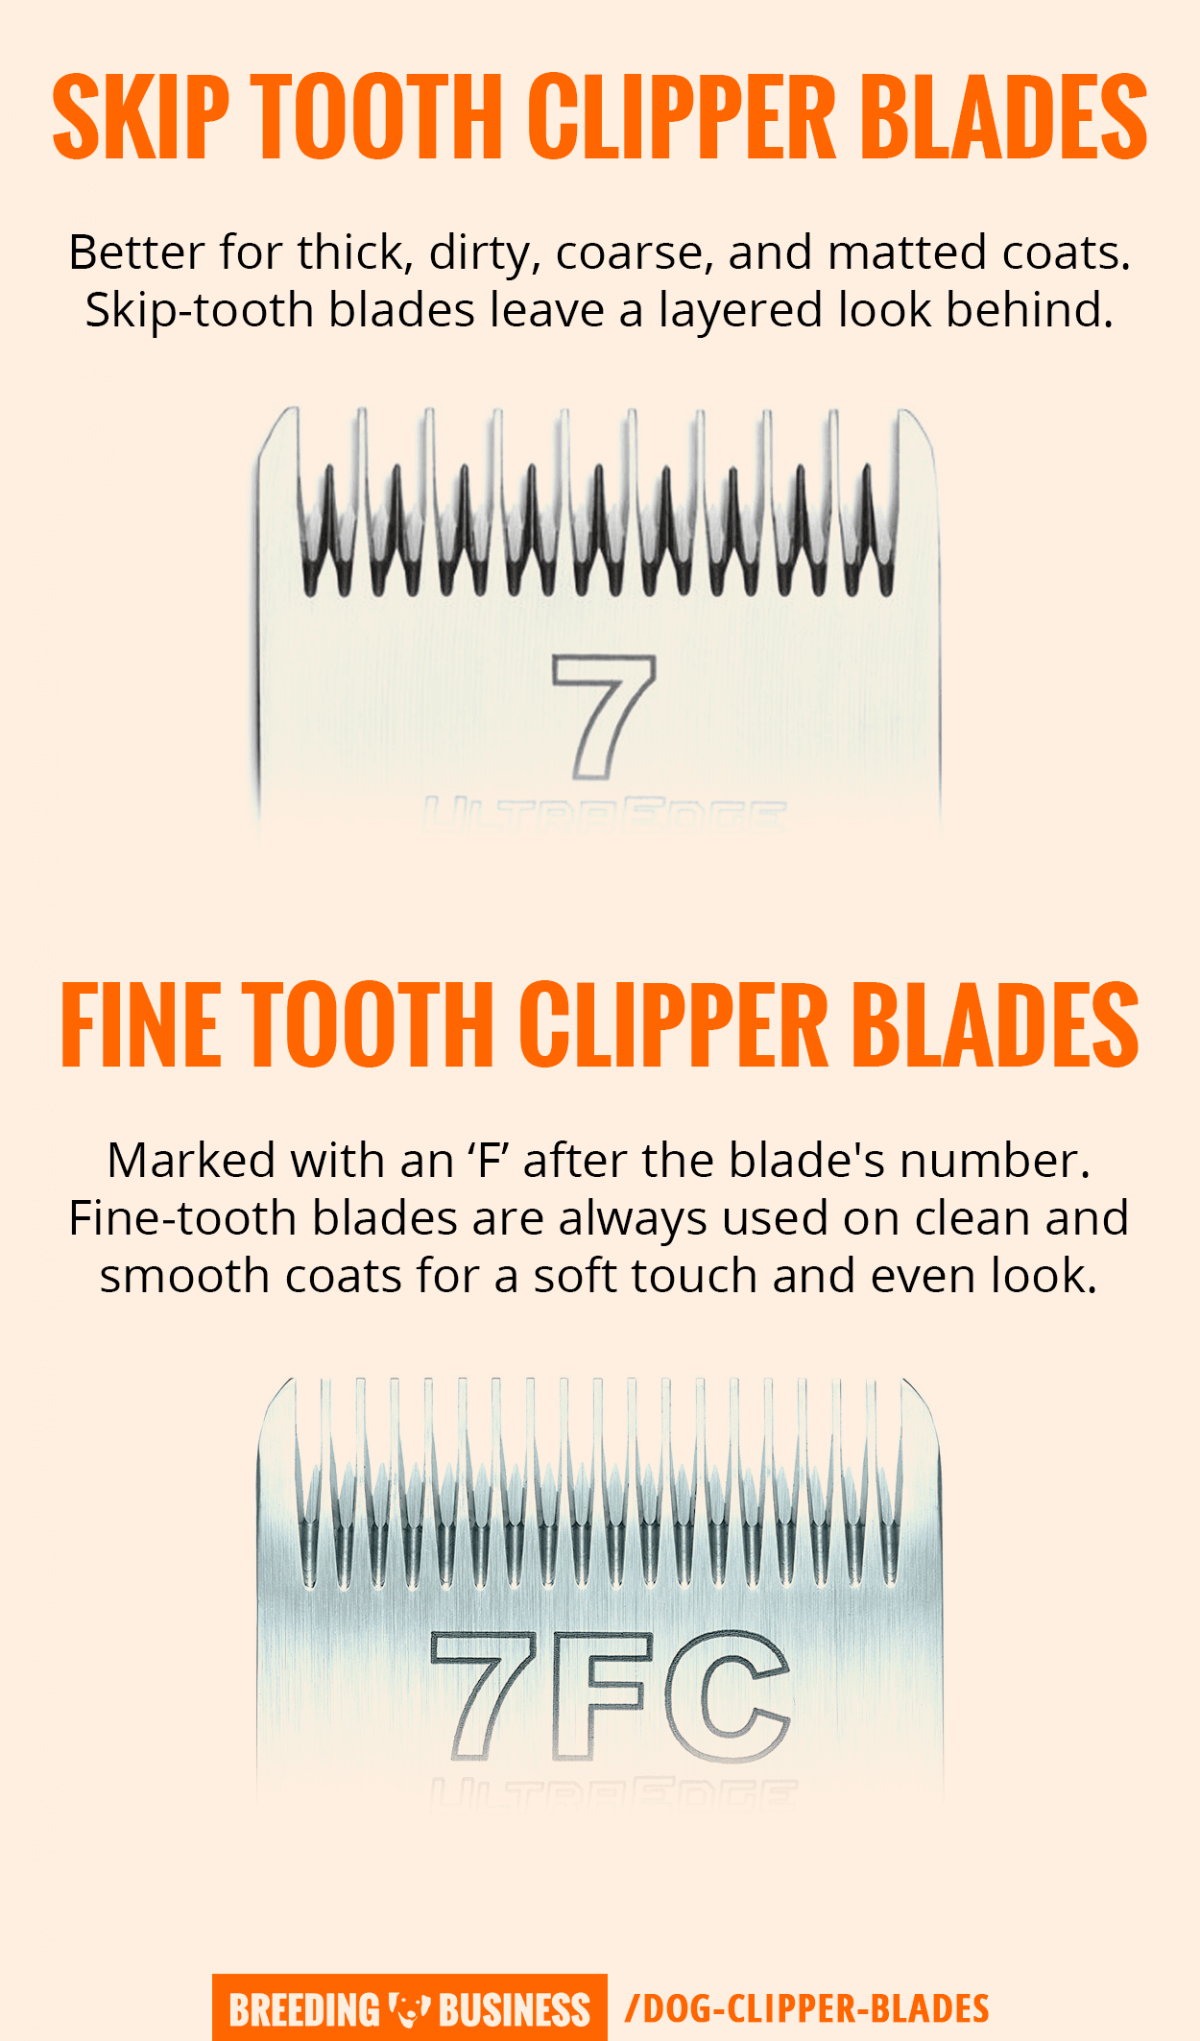 skip tooth and fine tooth in dog clippers